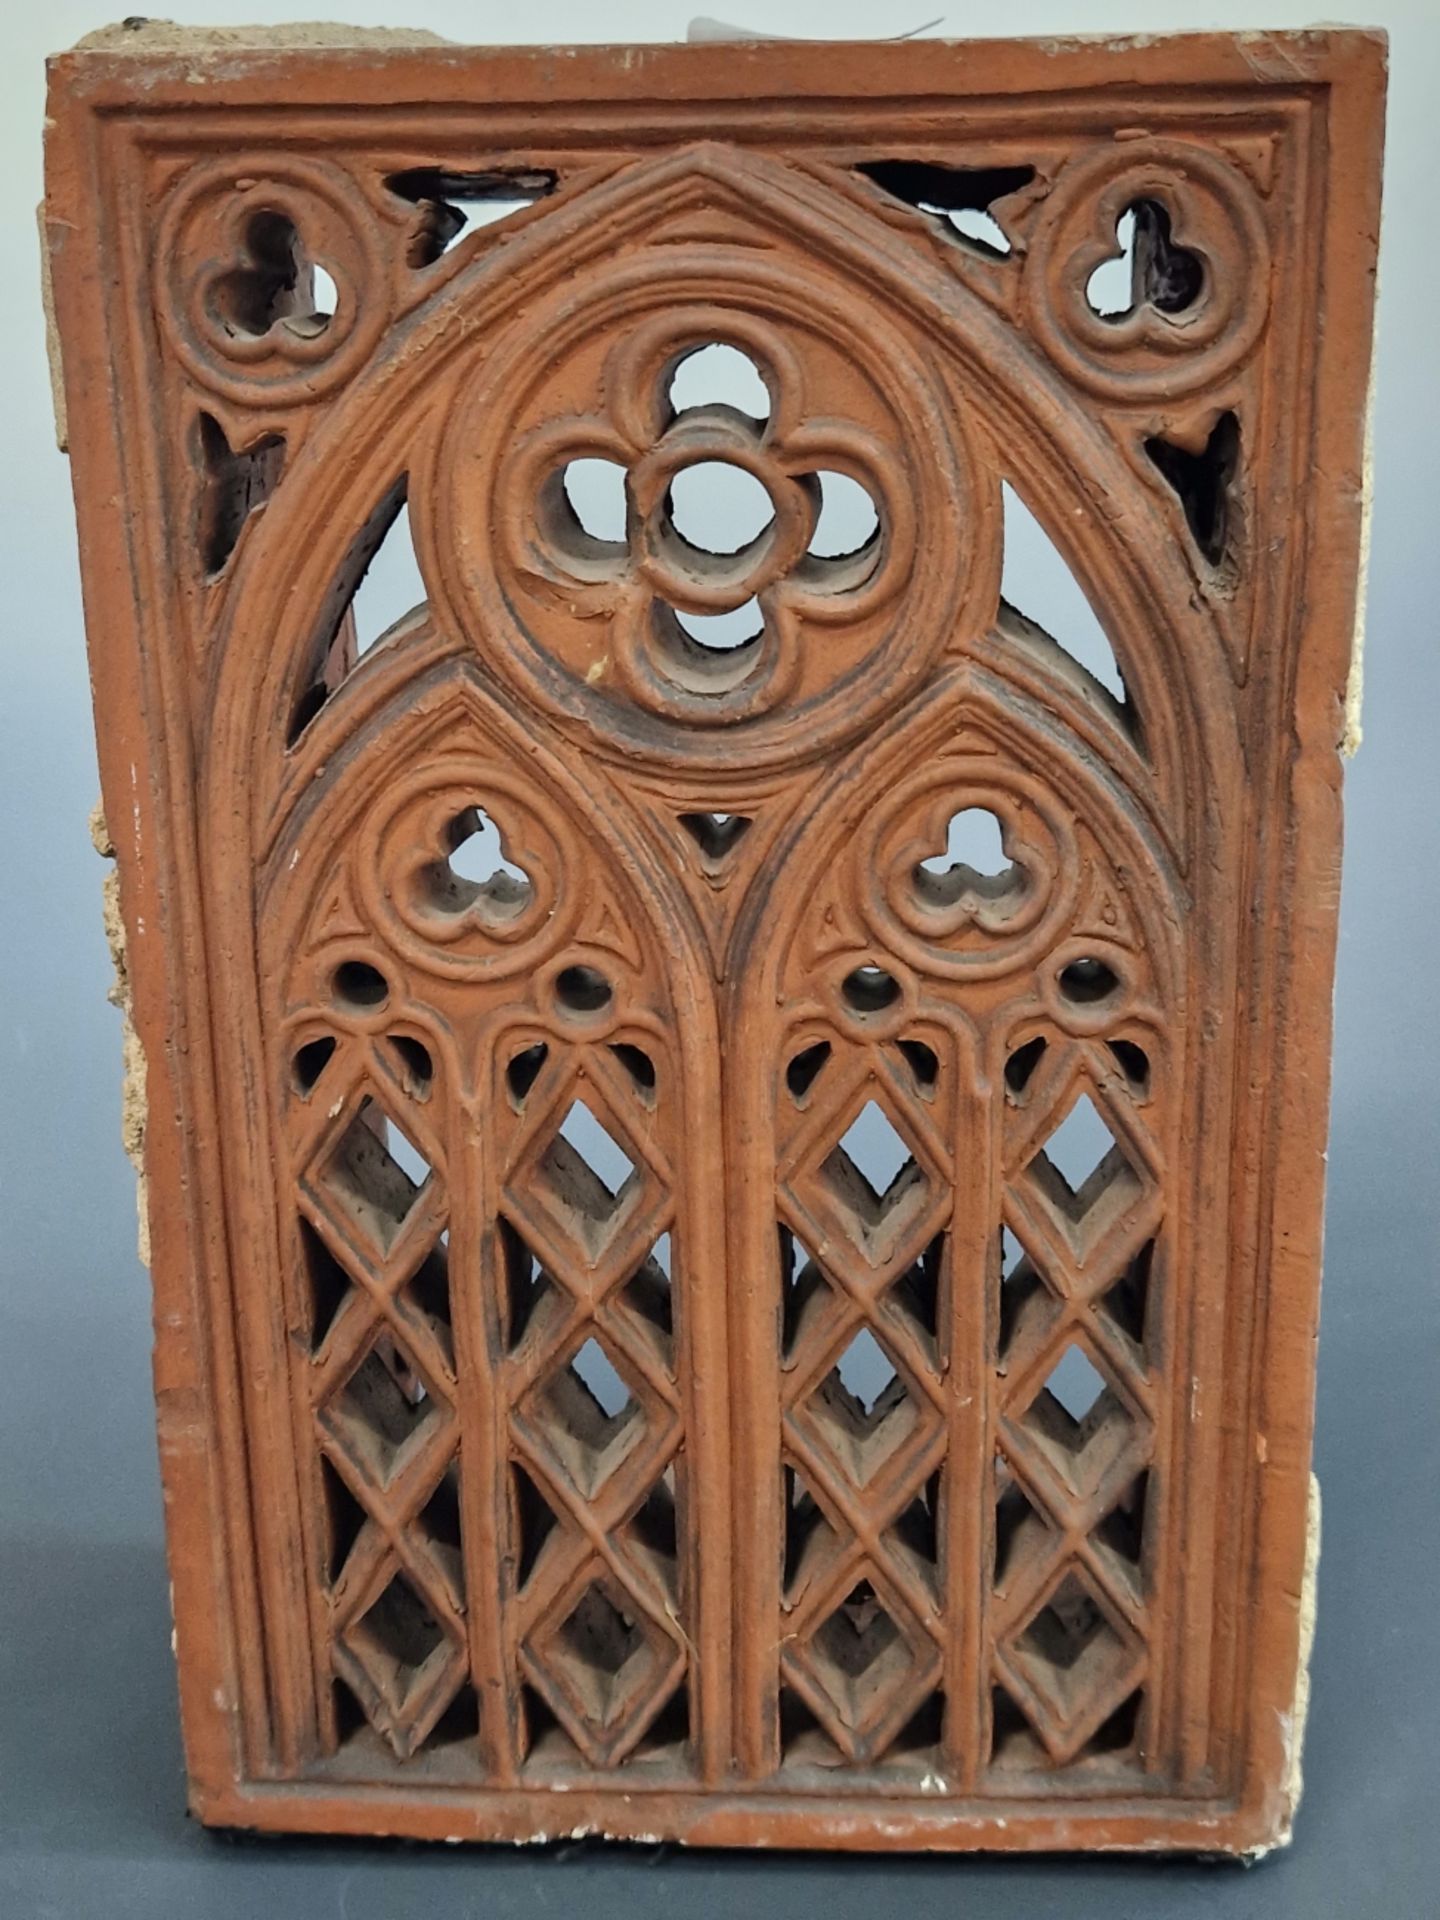 A DECORATIVE BRICK BY PLATTS PIERCED ON ONE SIDE WITH A GOTHIC WINDOW. H 26cms. - Image 2 of 4